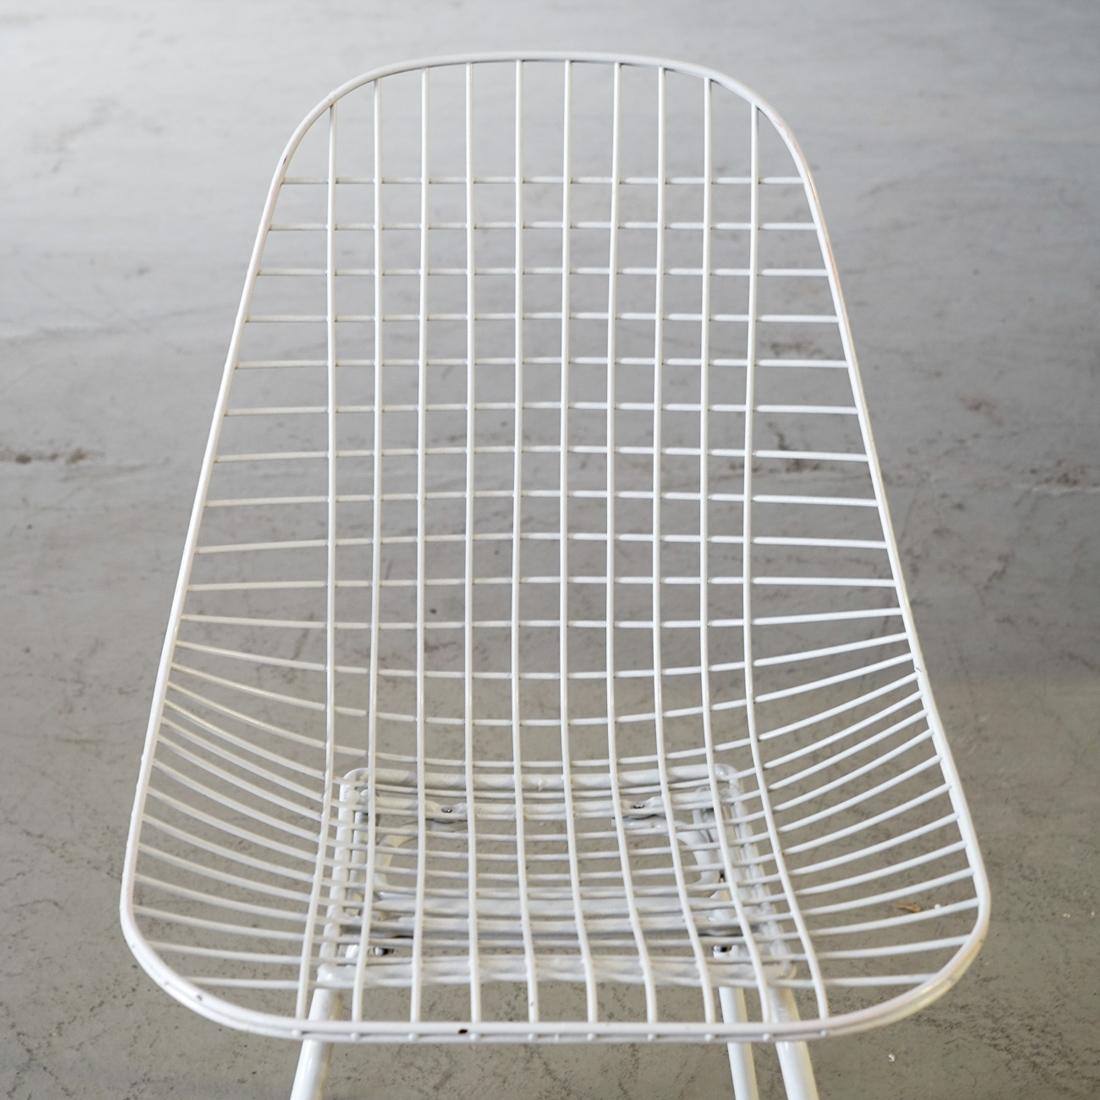 Wire Chair Modell DKX Designed by Charles and Ray Eames, 1950s (Lackiert) im Angebot